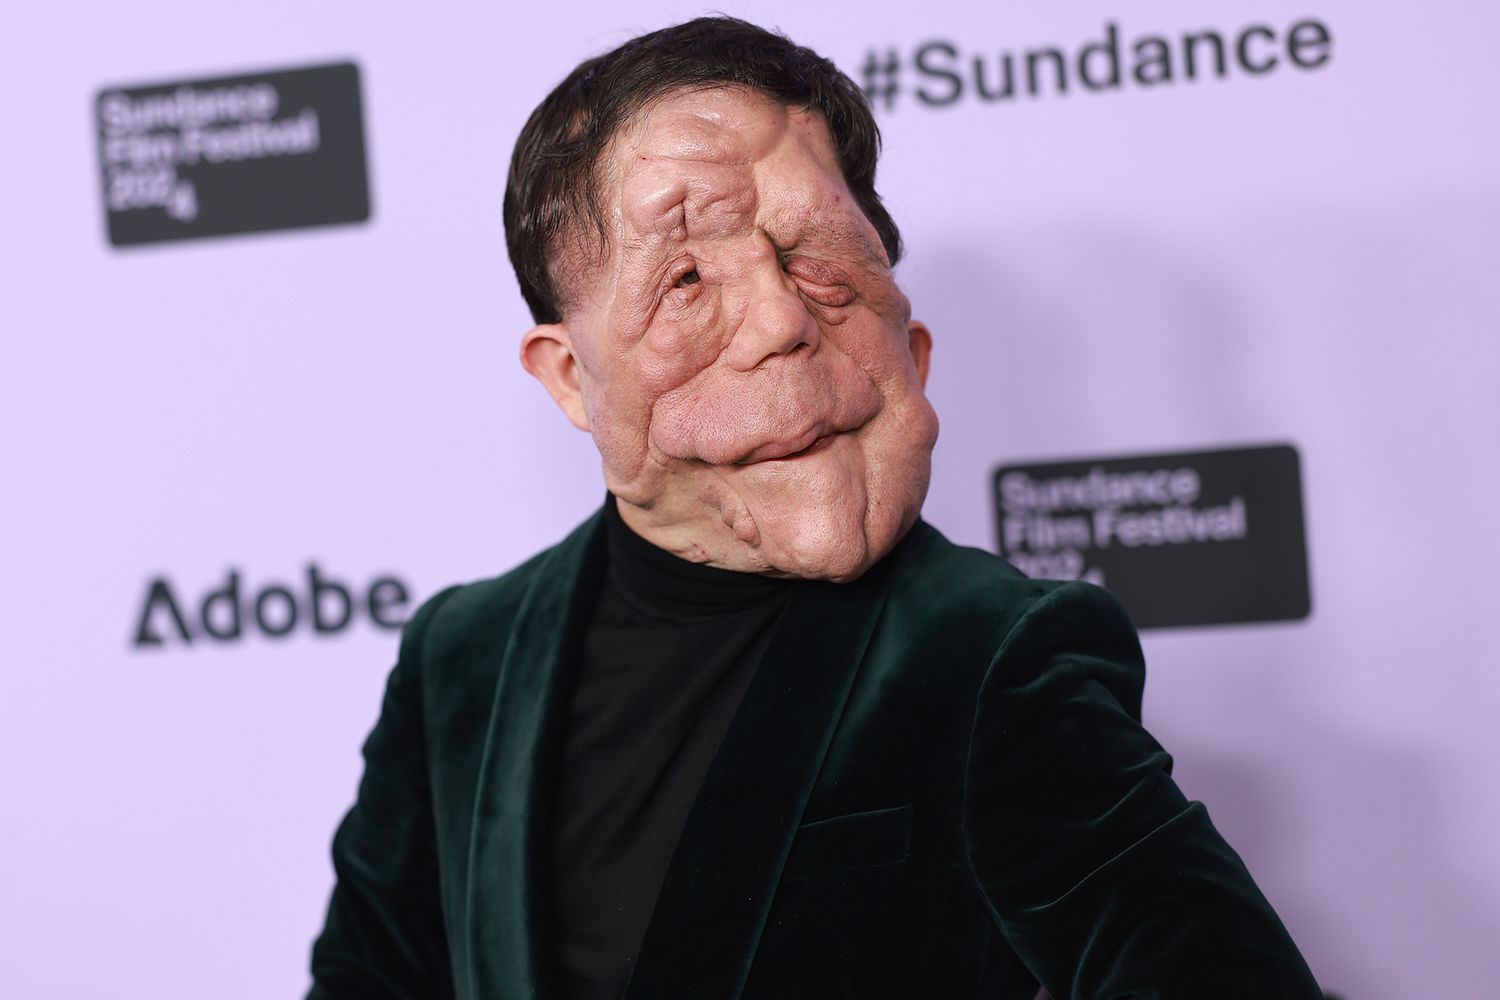 Adam Pearson attends the "A Different Man" Premiere during the 2024 Sundance Film Festival at Eccles Center Theatre on January 21, 2024 in Park City, Utah.